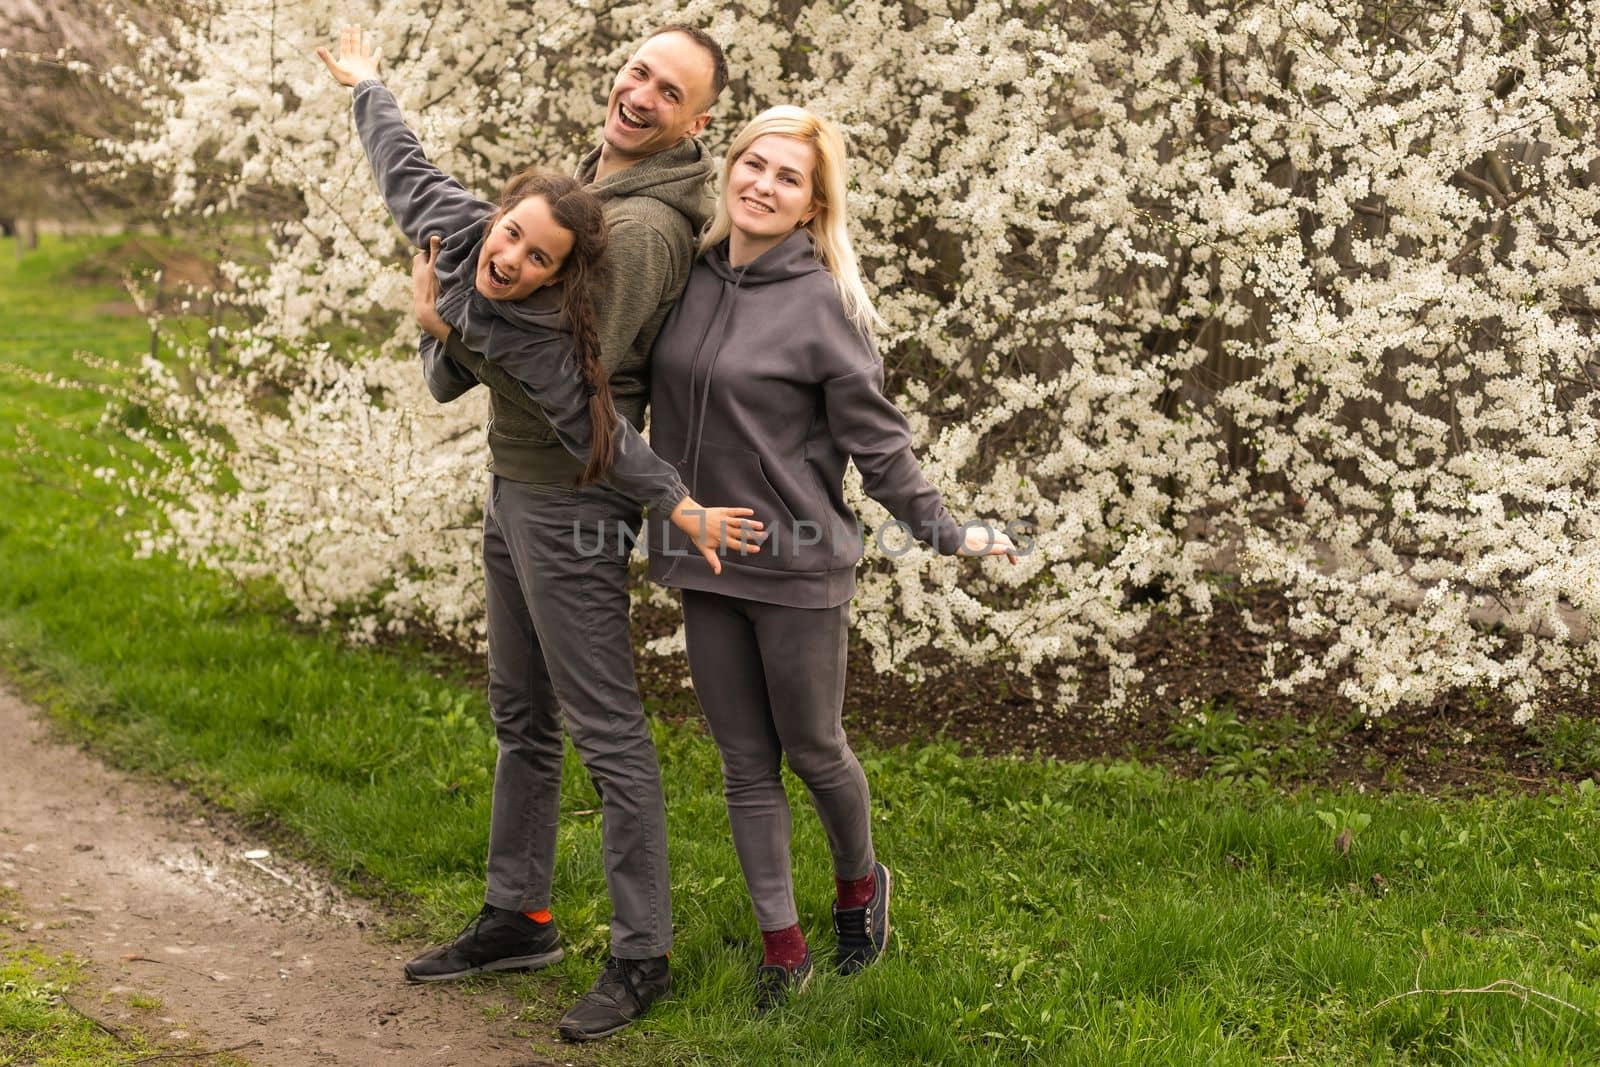 family in blooming garden with trees. by Andelov13